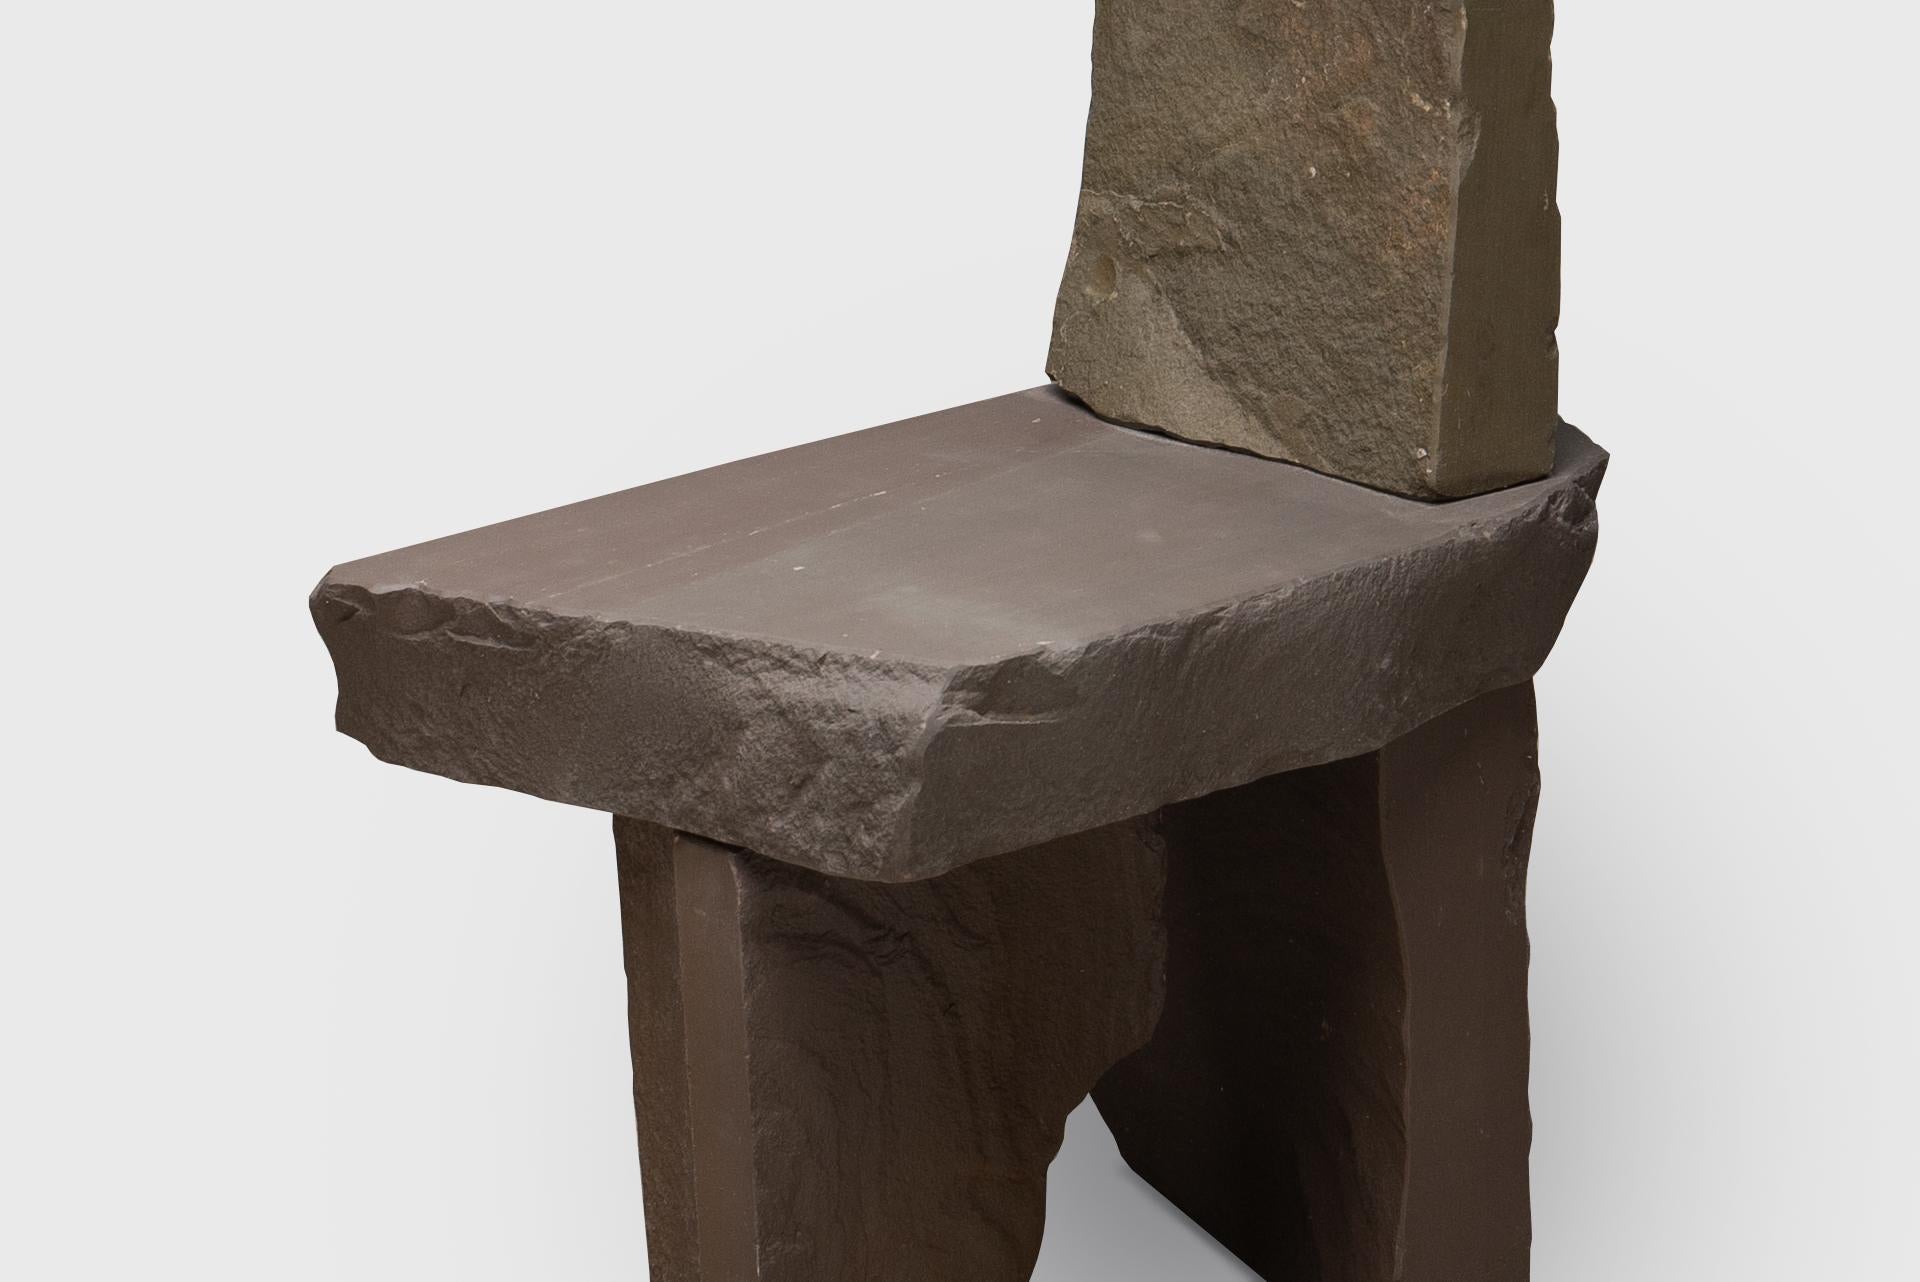 The graywacke offcut series is a continuation of the designer’s fieldwork carried out at a local sandstone quarry, Lindlar, during his graduation project. Always seeking the irregular in the regular, enormous piles of discarded sandstone offcuts